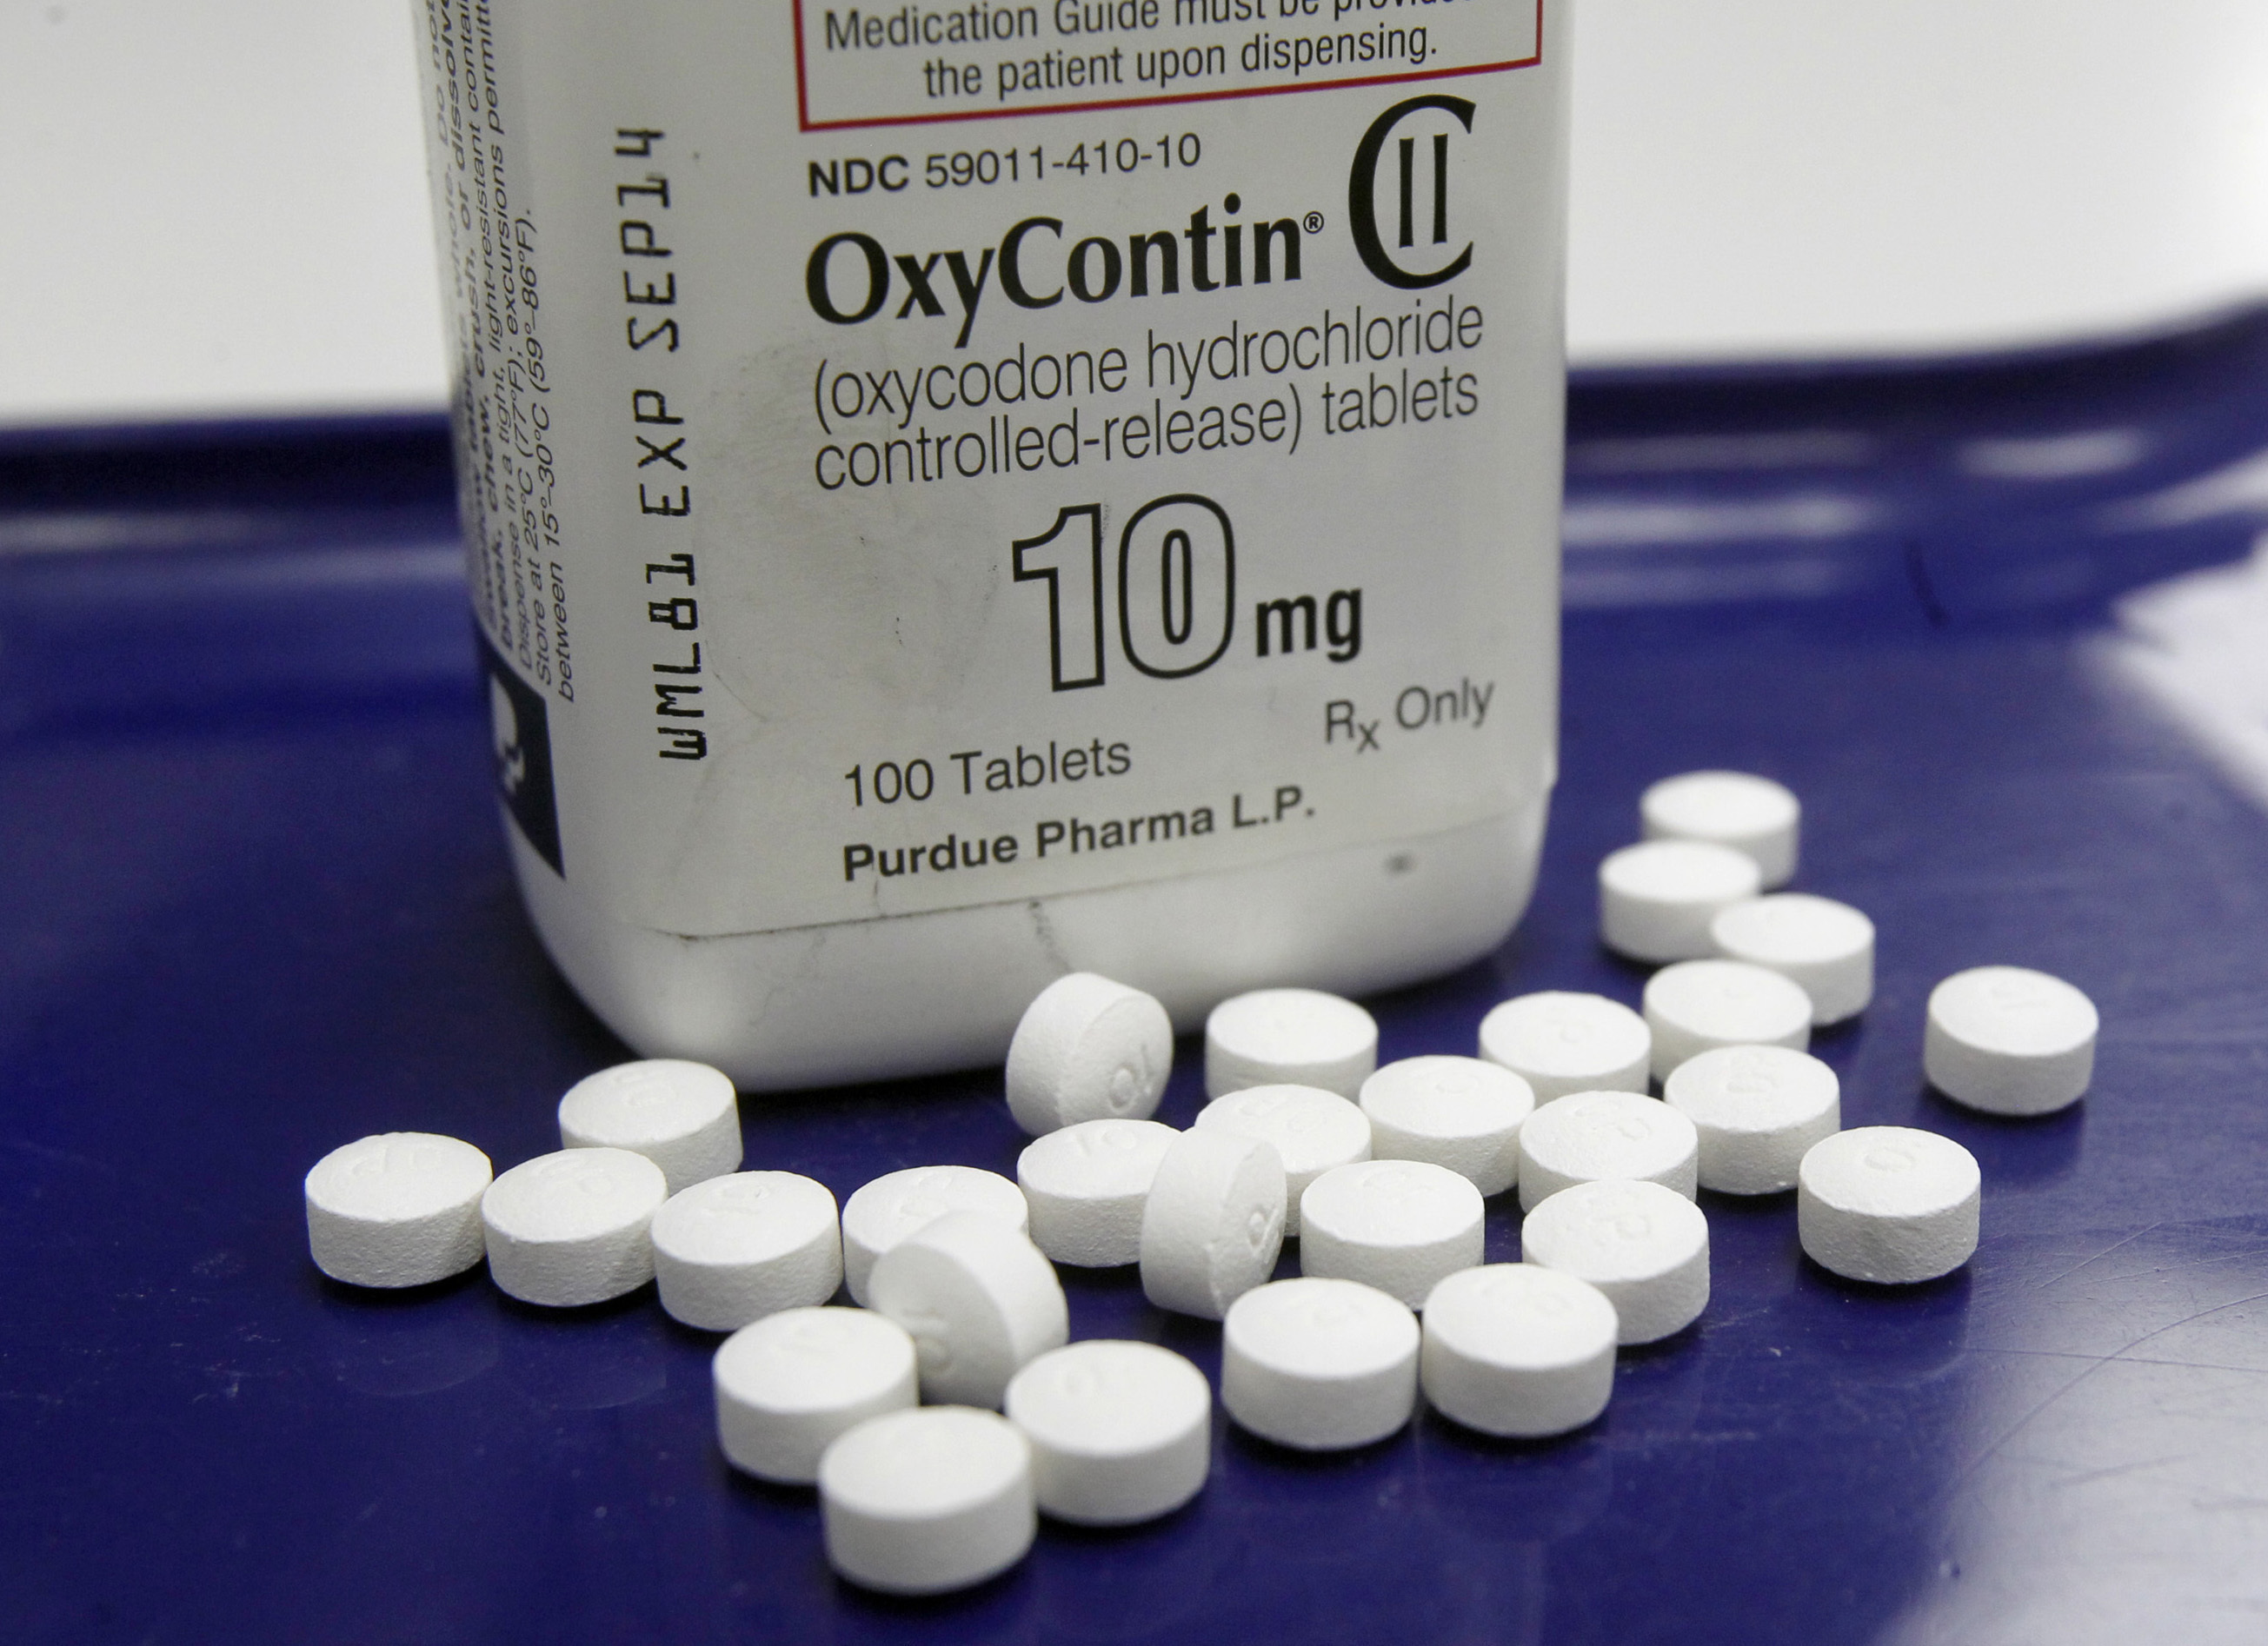 This Feb. 19, 2013, file photo shows OxyContin pills arranged for a photo at a pharmacy in Montpelier, Vt. More than 28,000 Americans died from overdosing on opiates in 2014, a record high for the nation. That’s 78 people per day, a number that doesn’t include the millions of family members, first responders and even taxpayers who feel the ripple of drug addiction in their daily lives. A rise in prescription painkillers is partially to blame: The sale of these drugs has quadrupled since 1999, and so has the number of Americans dying from an addiction to them. When prescriptions run out, people find themselves turning to the cheaper alternative heroin and, increasingly, the even more deadly drug fentanyl.